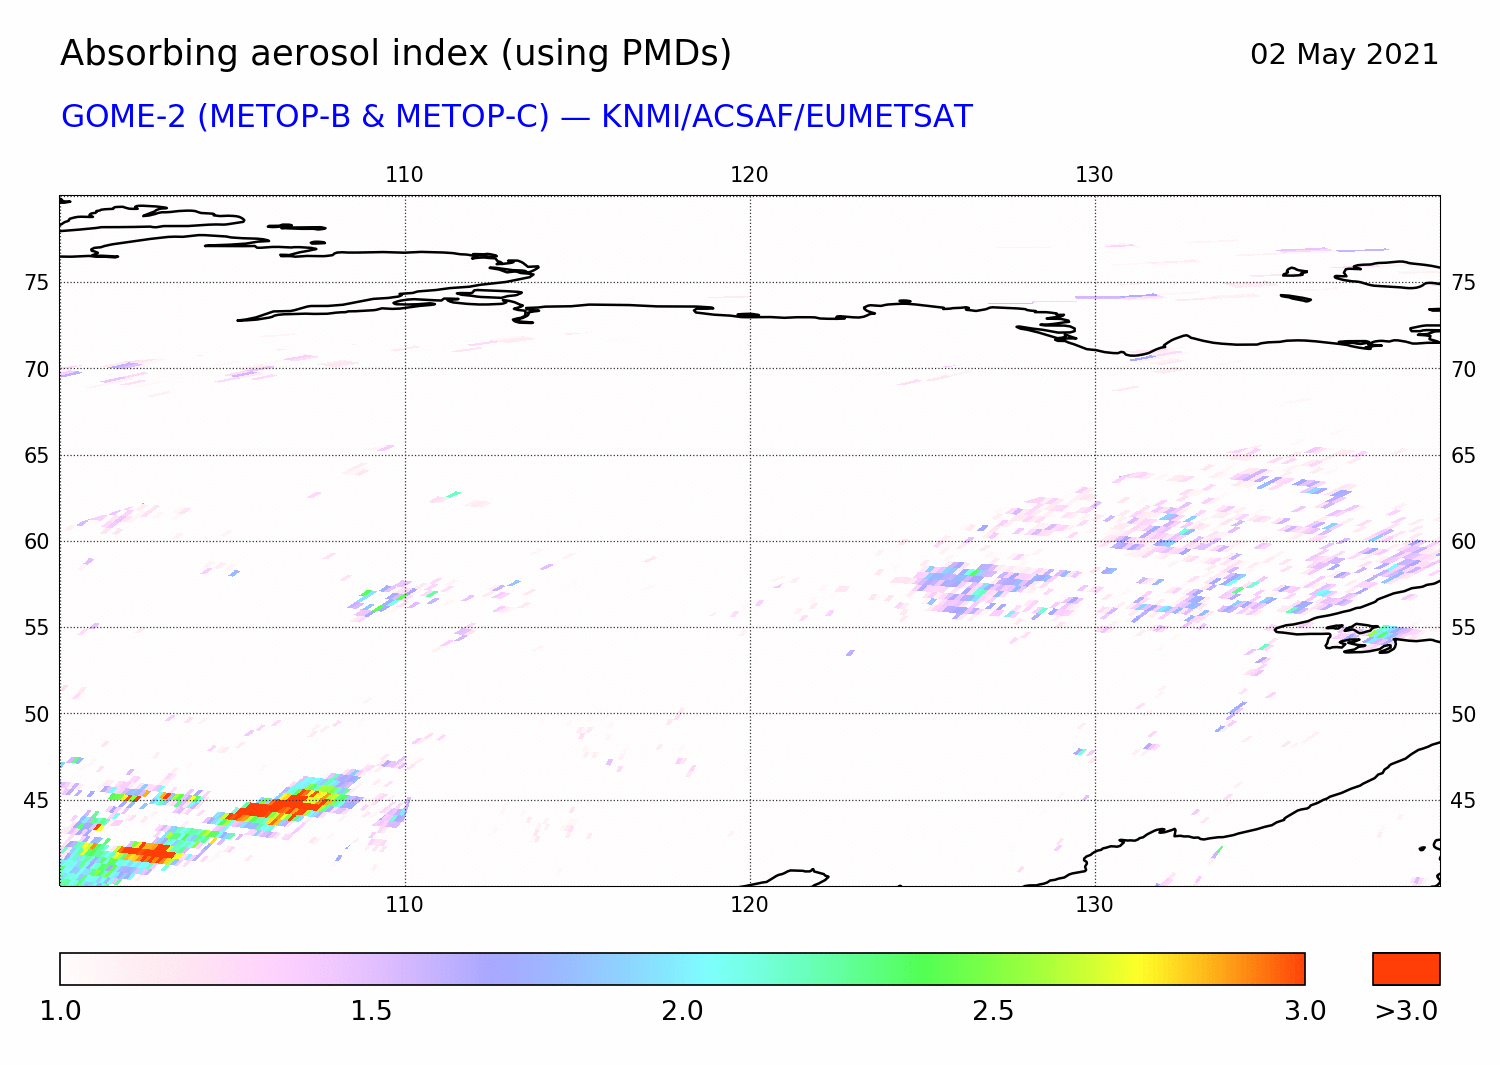 GOME-2 - Absorbing aerosol index of 02 May 2021